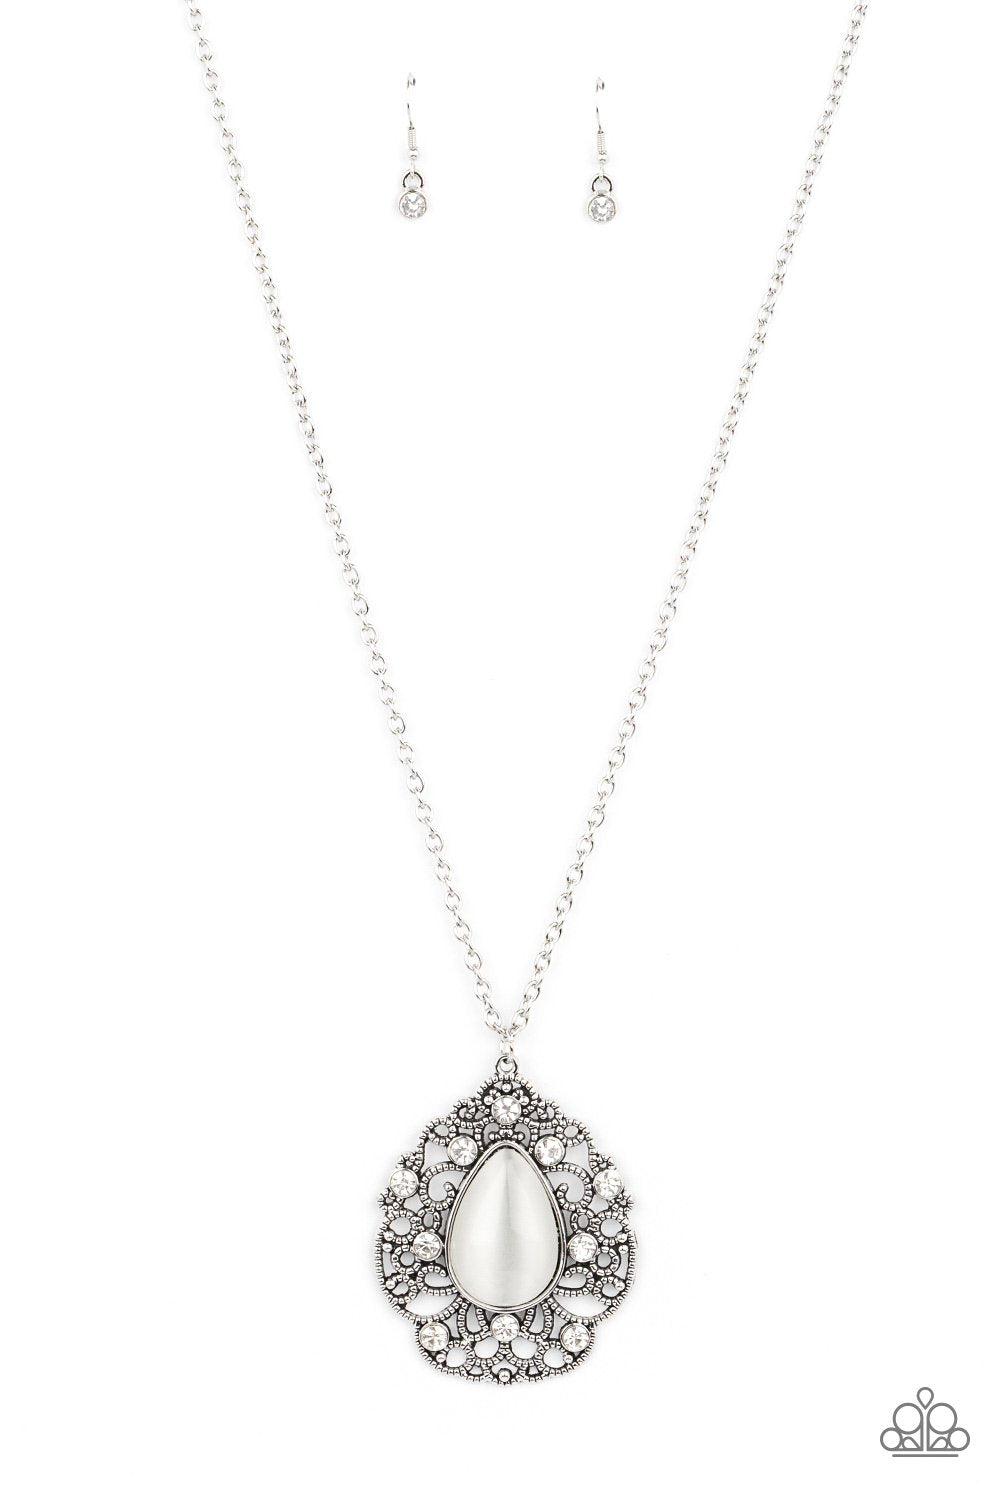 Bewitched Beam White Cat's Eye Stone Necklace - Paparazzi Accessories- lightbox - CarasShop.com - $5 Jewelry by Cara Jewels